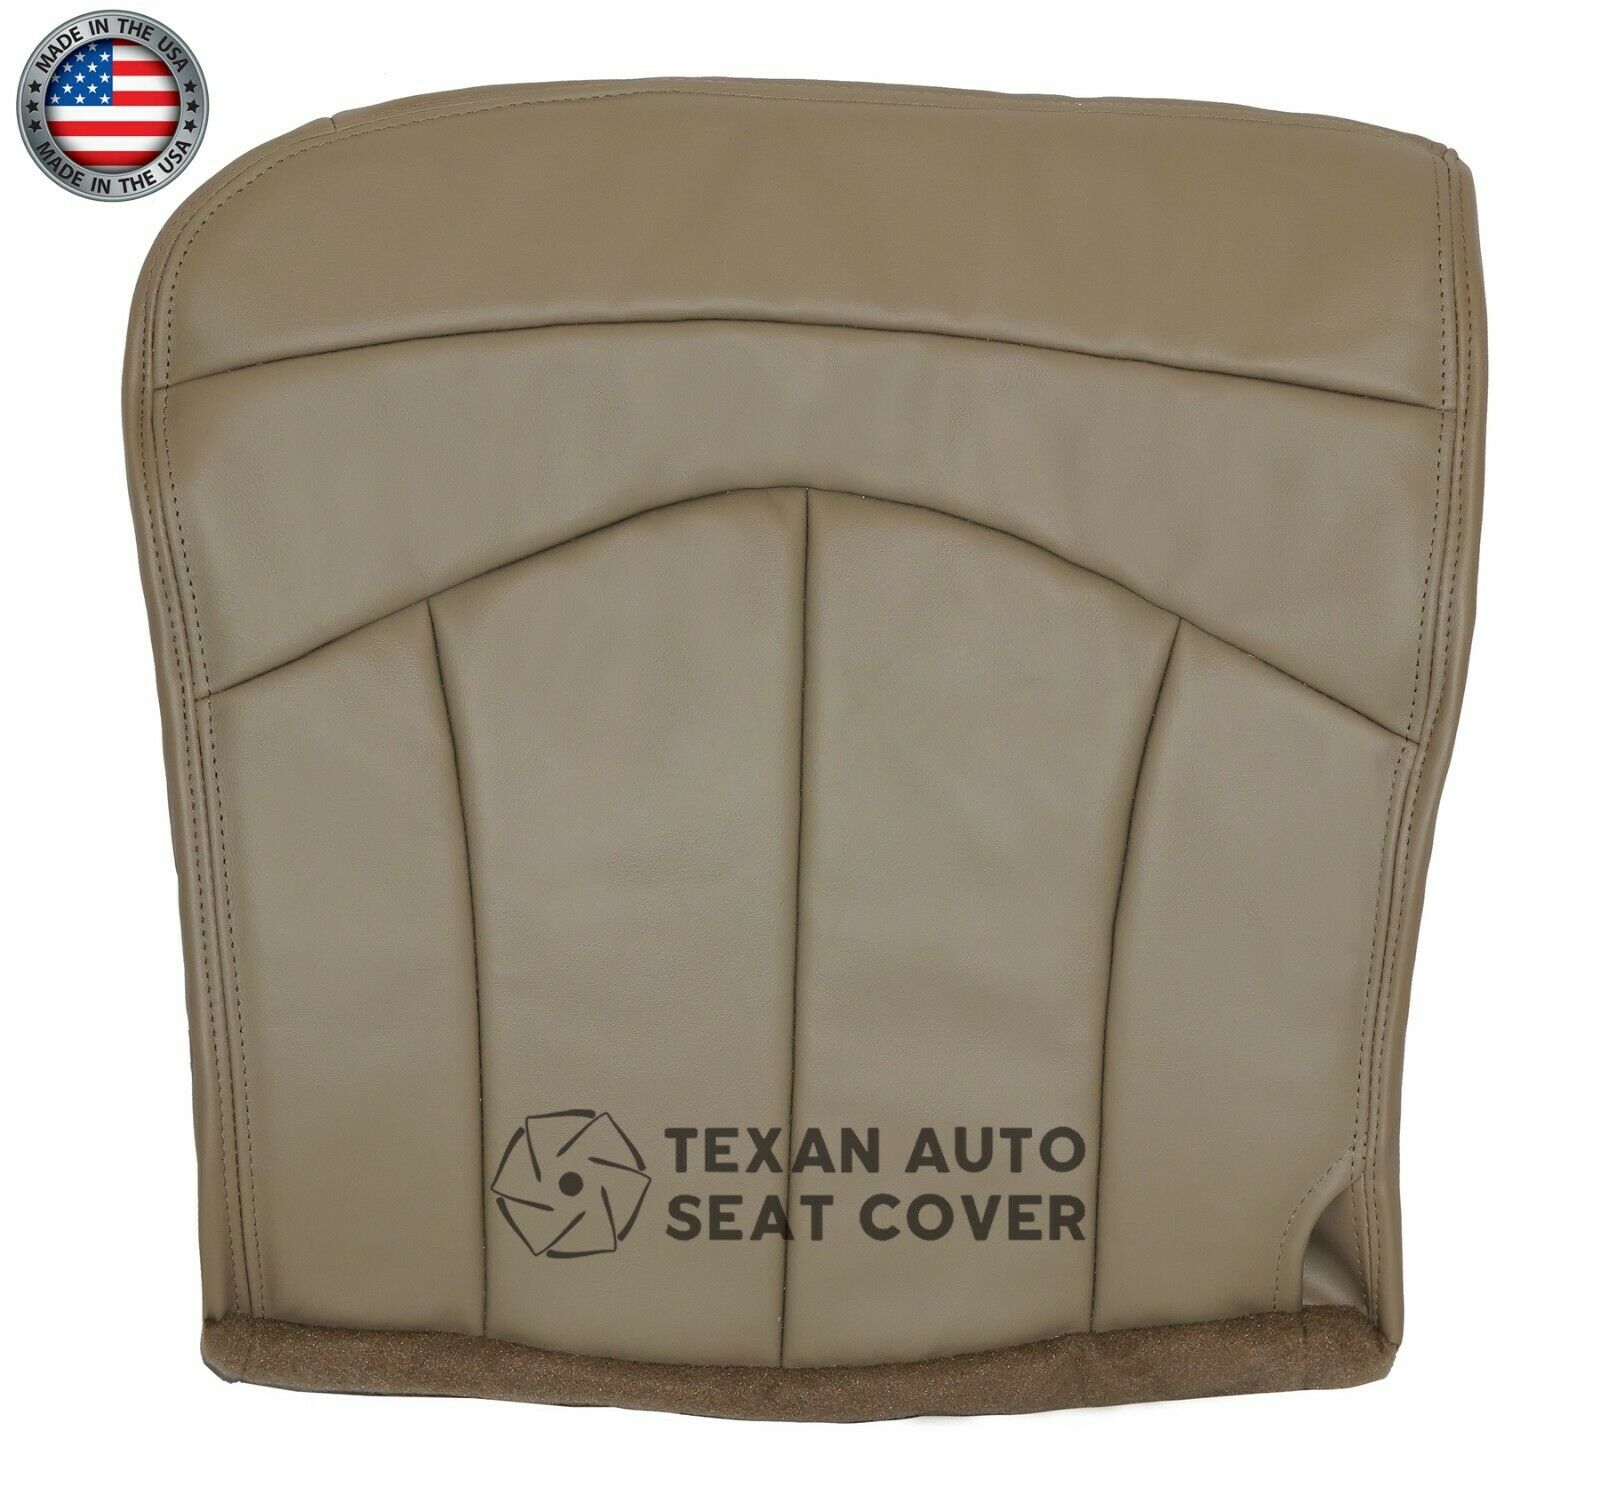 2000, 2001 Ford F150 Lariat Single-Cab, Super-Cab, Extended-Cab Passenger Side Bottom Leather Replacement Seat Cover Tan